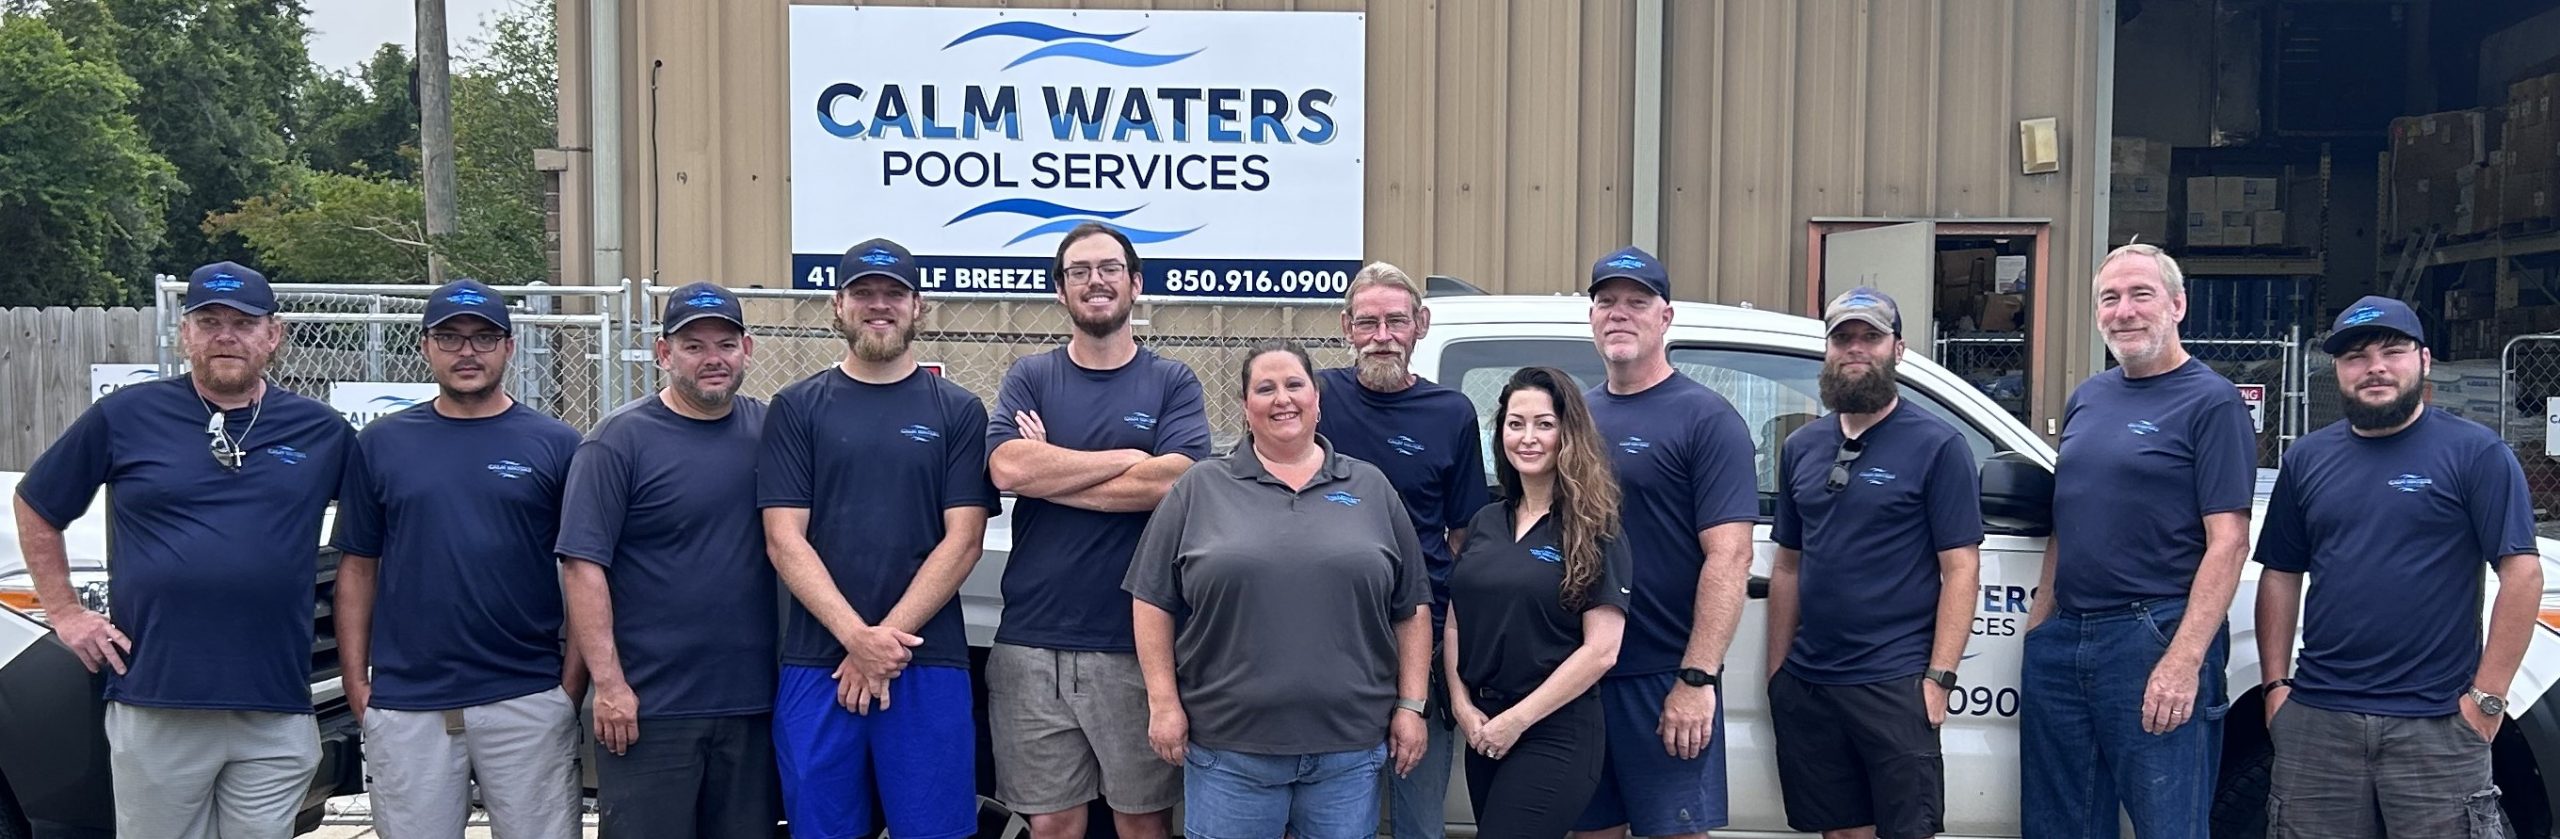 Calm Waters Pool Services® Gulf Breeze Team Photo